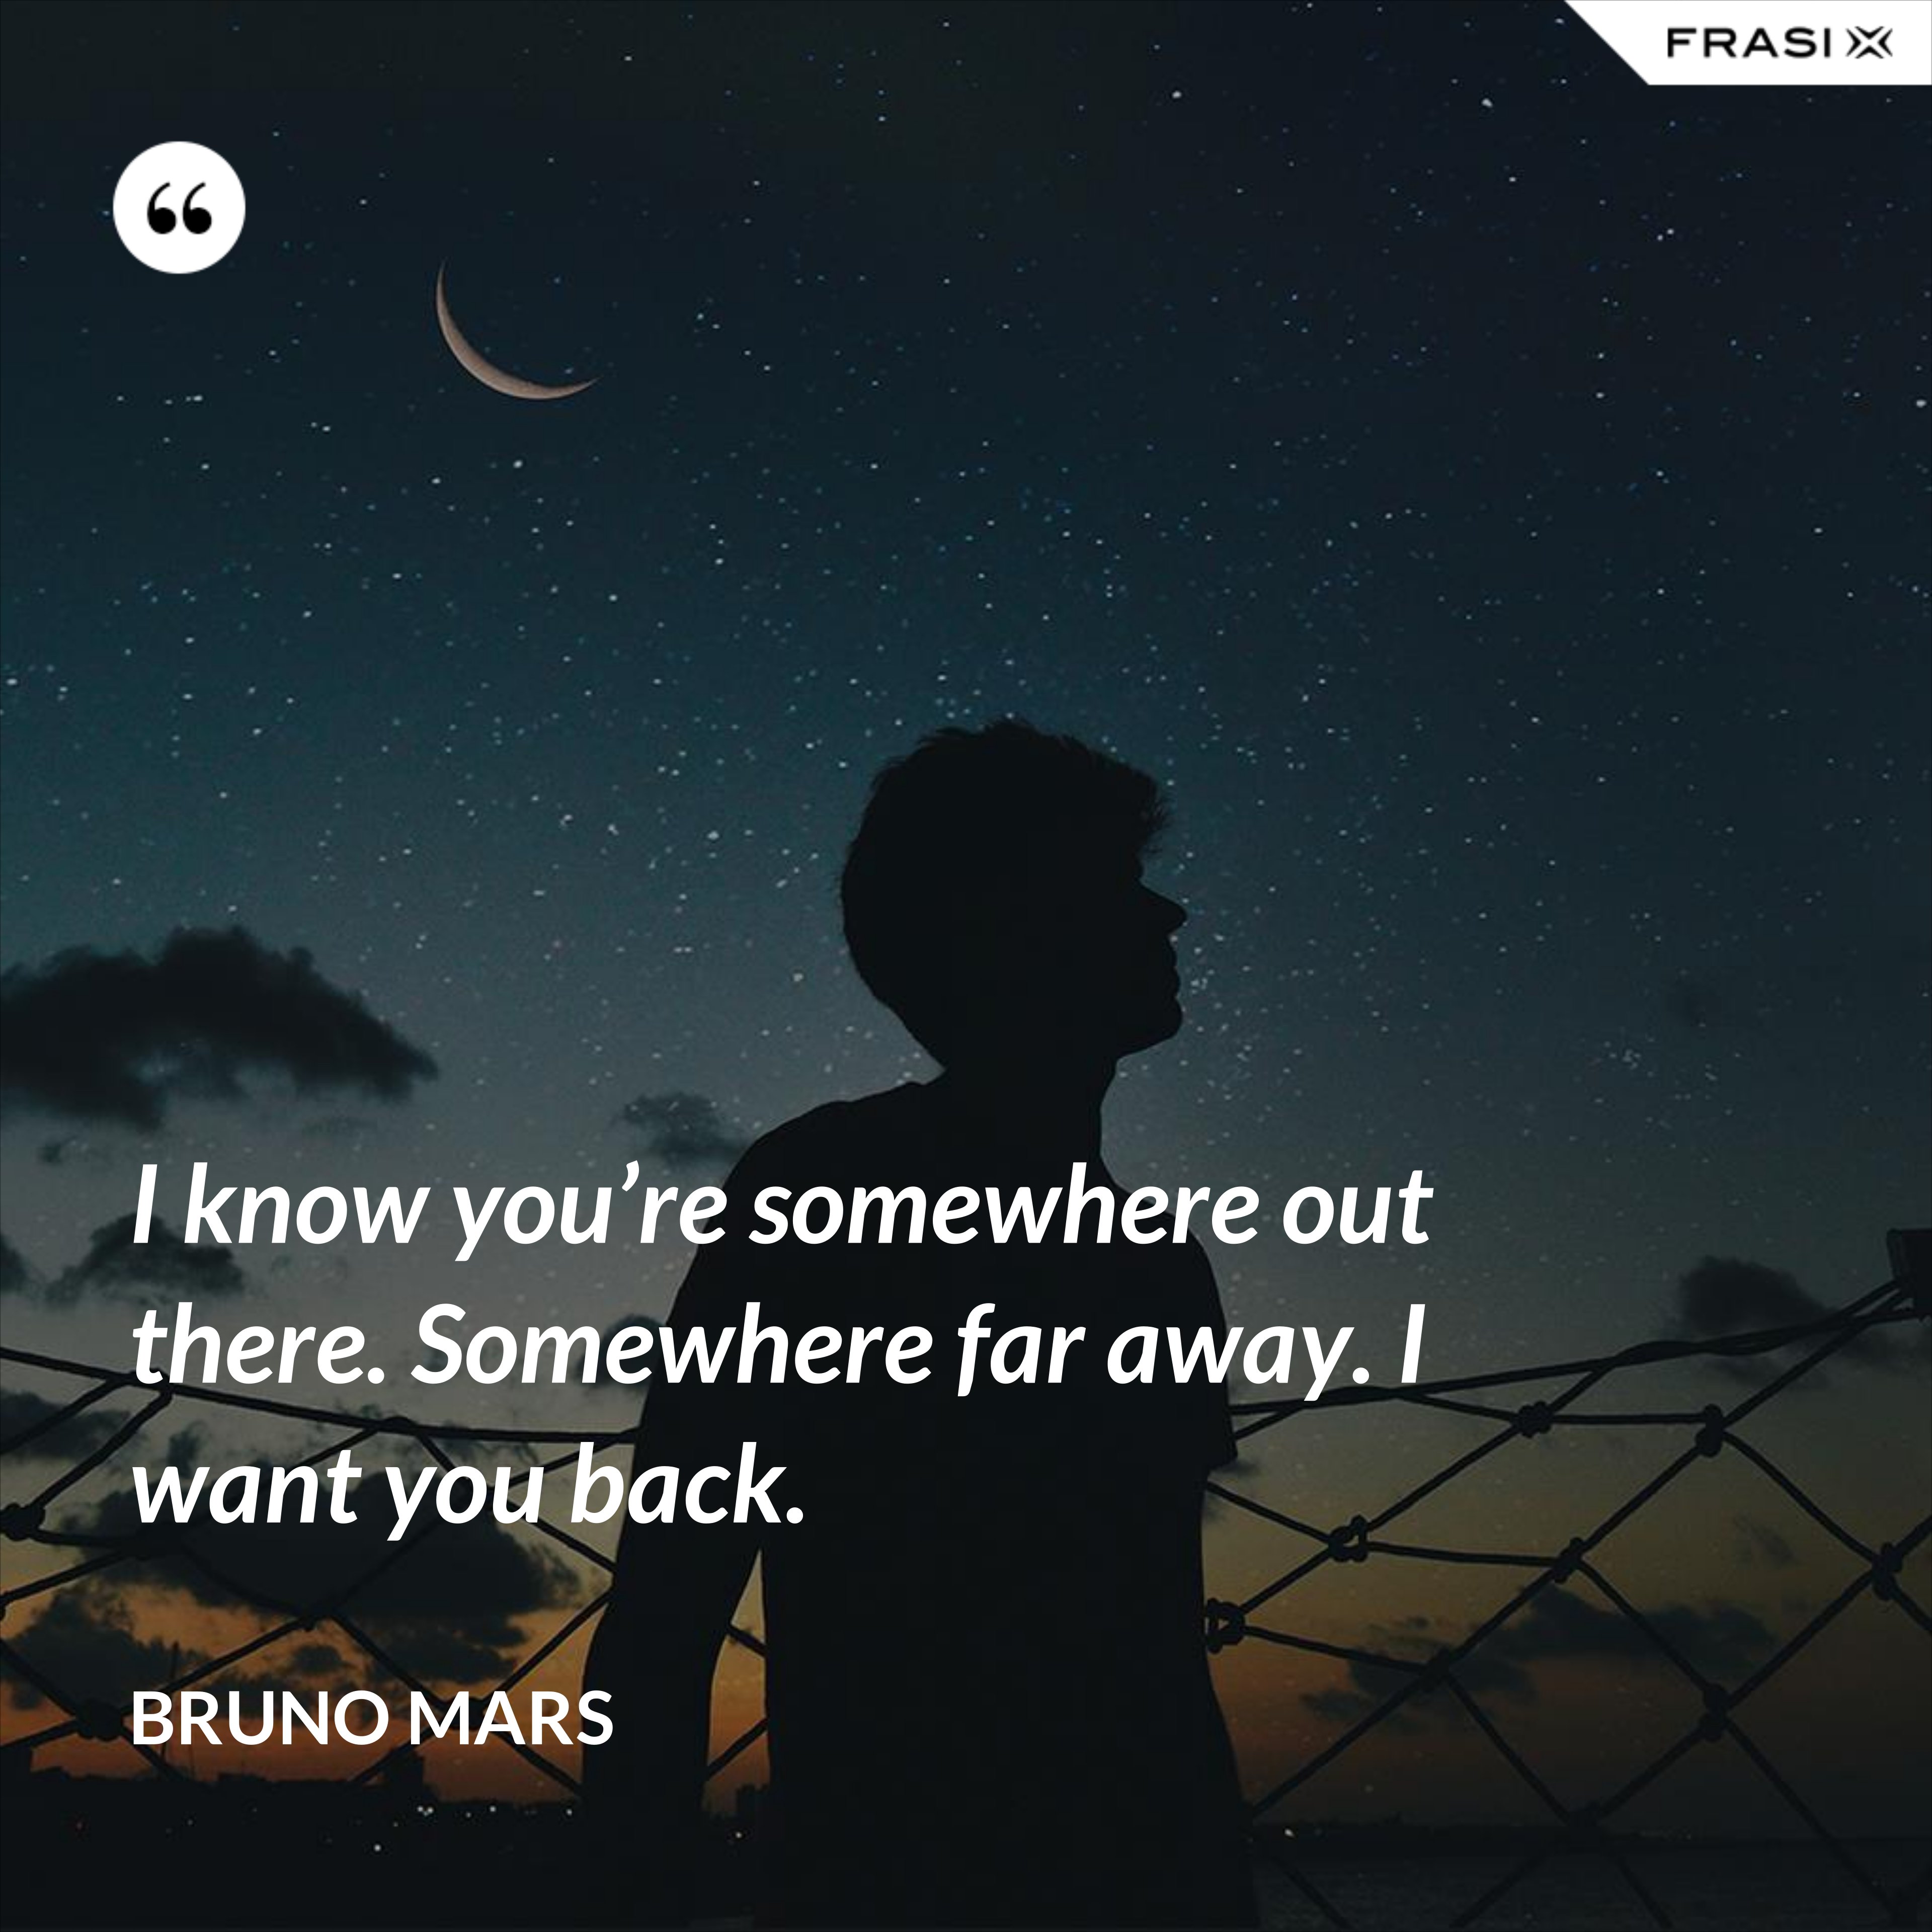 I know you’re somewhere out there. Somewhere far away. I want you back. - Bruno Mars